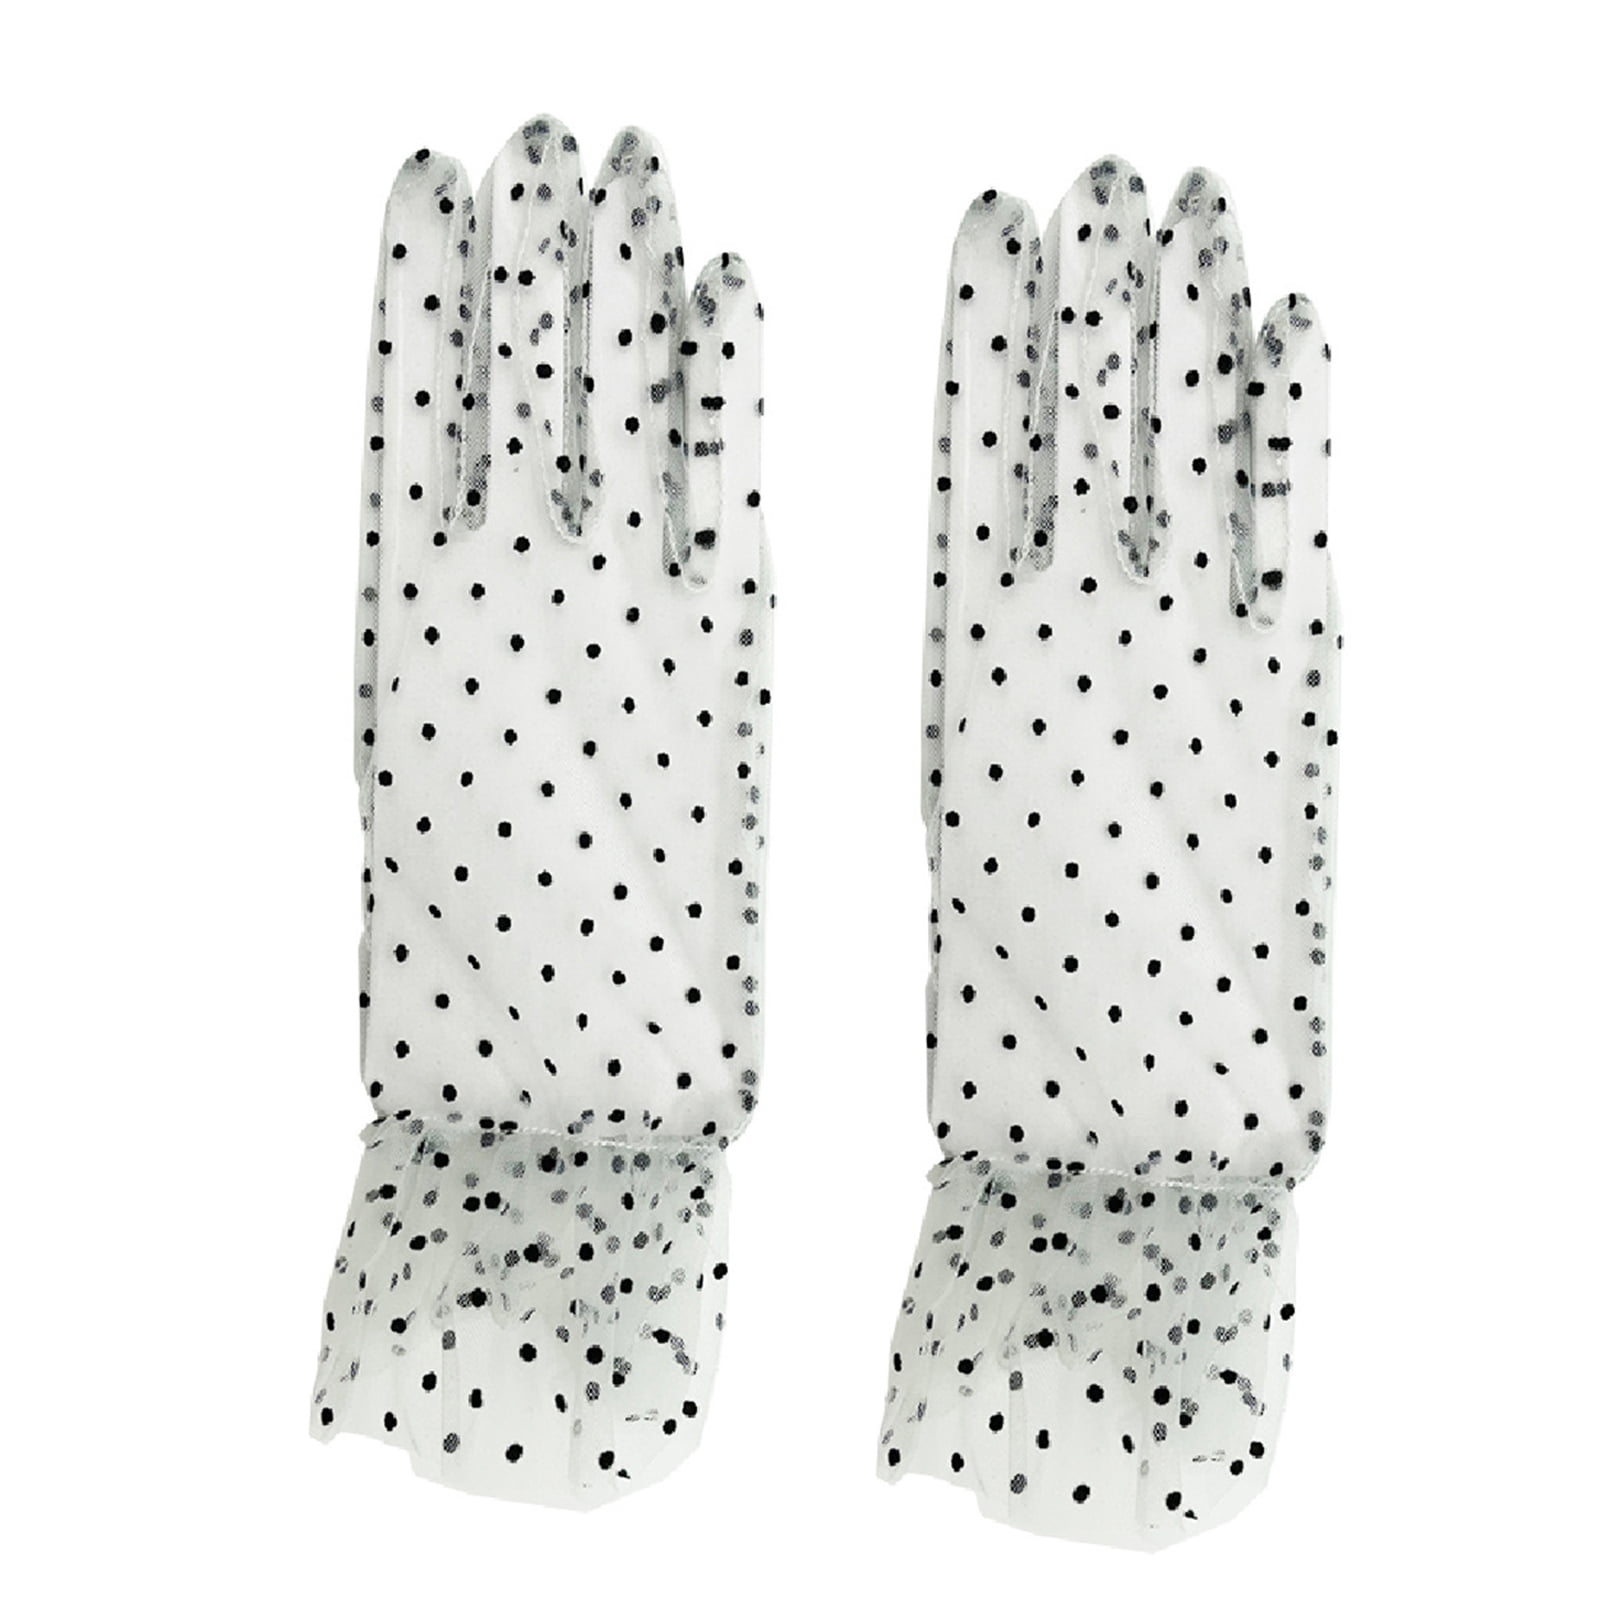 Chic Letter Embroidered Lace Long Lace Gloves With Sunscreen And Mesh  Womens Long Drive Mittens With Gift Box From Boxcard, $20.48